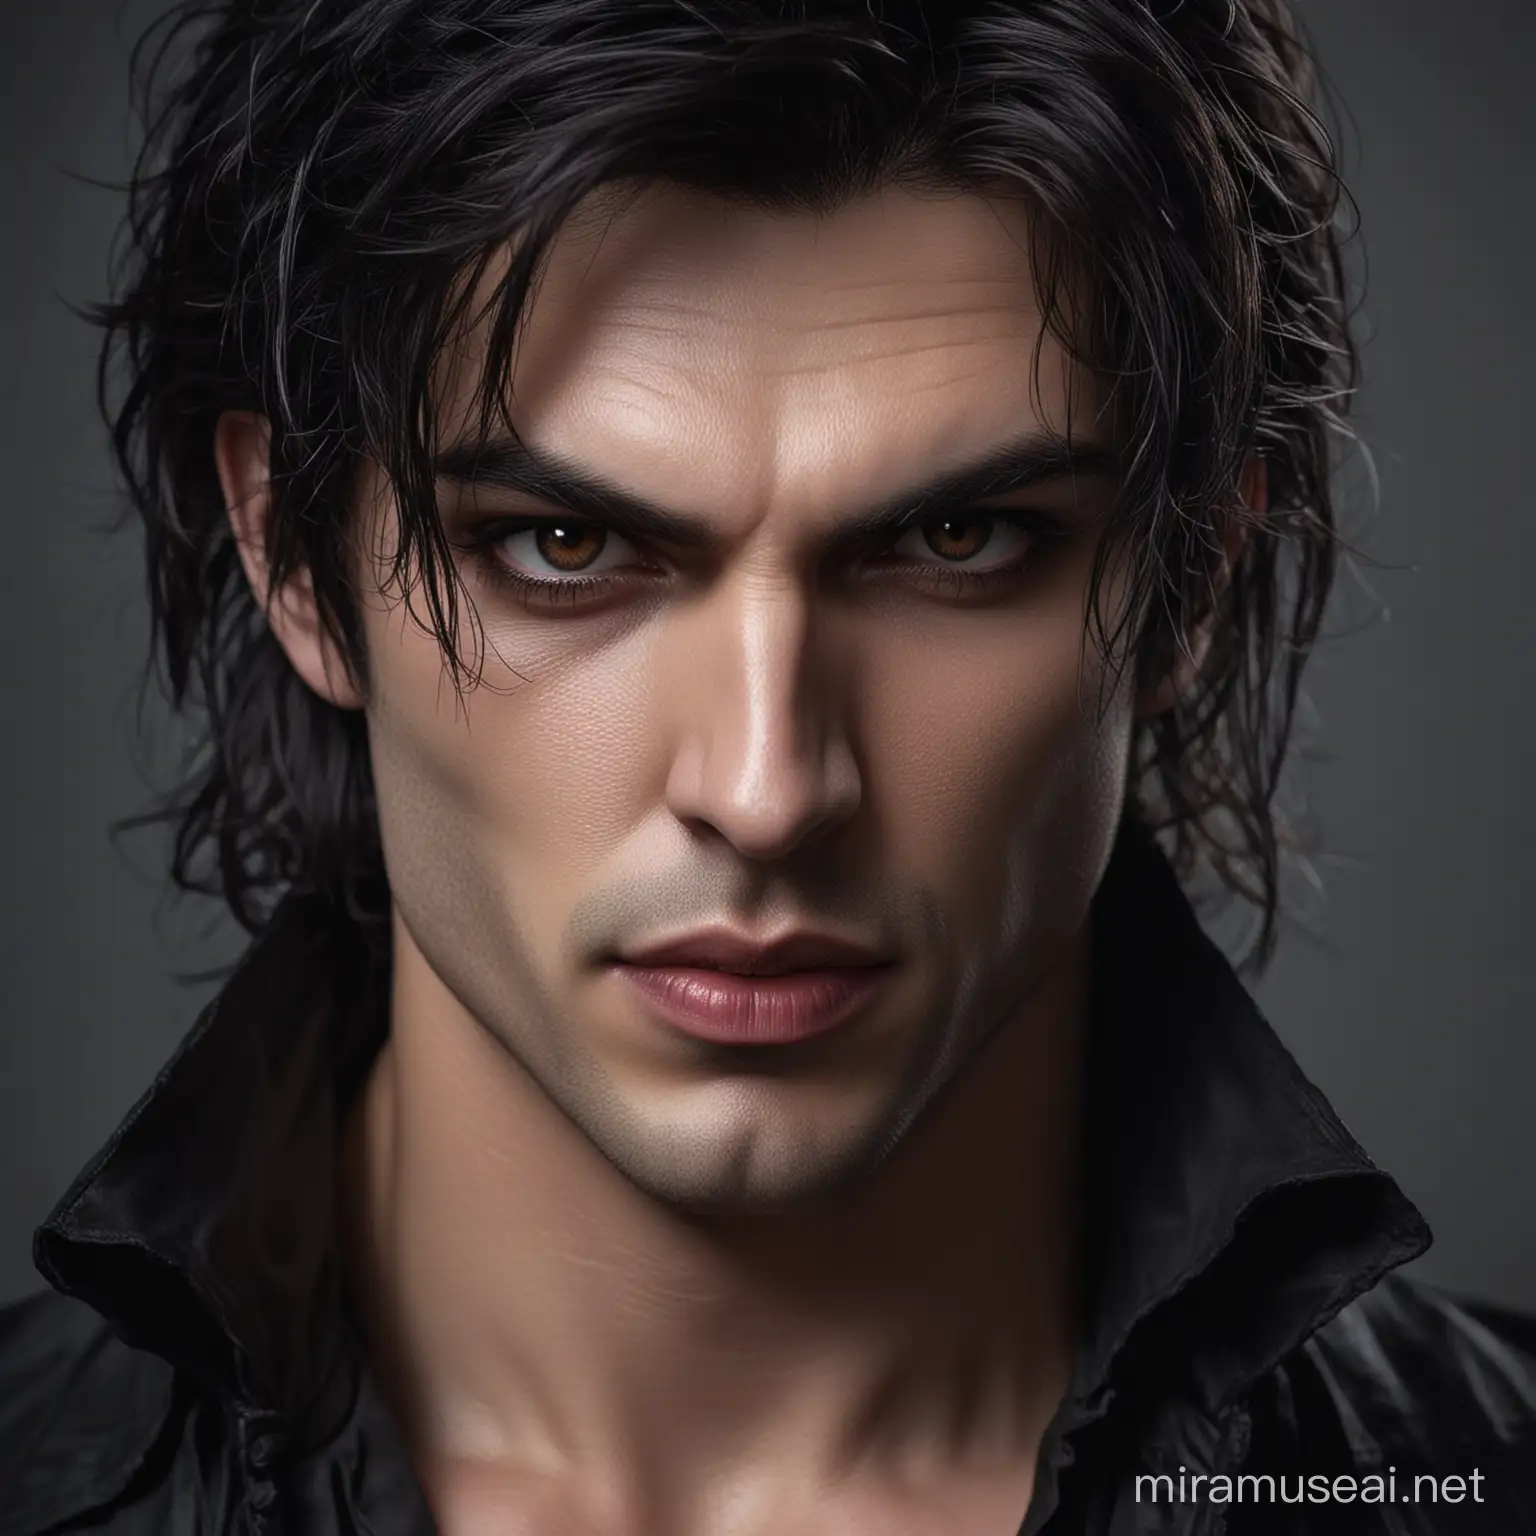 CloseUp Portrait of Brooding Male Vampire with Dark Hair